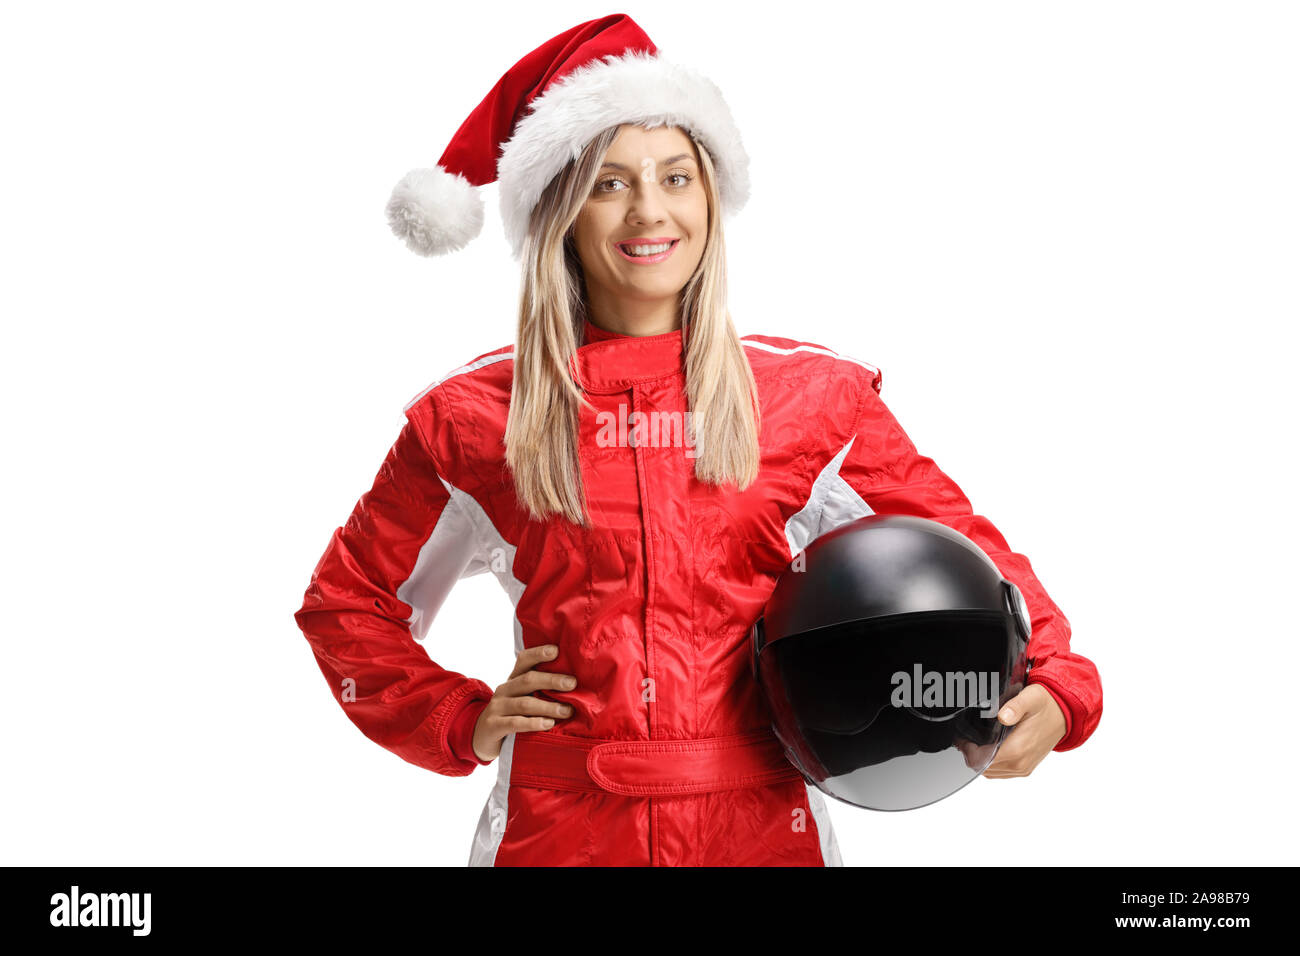 Female racer wearing a Santa Claus hat and holding a helmet isolated on white background Stock Photo